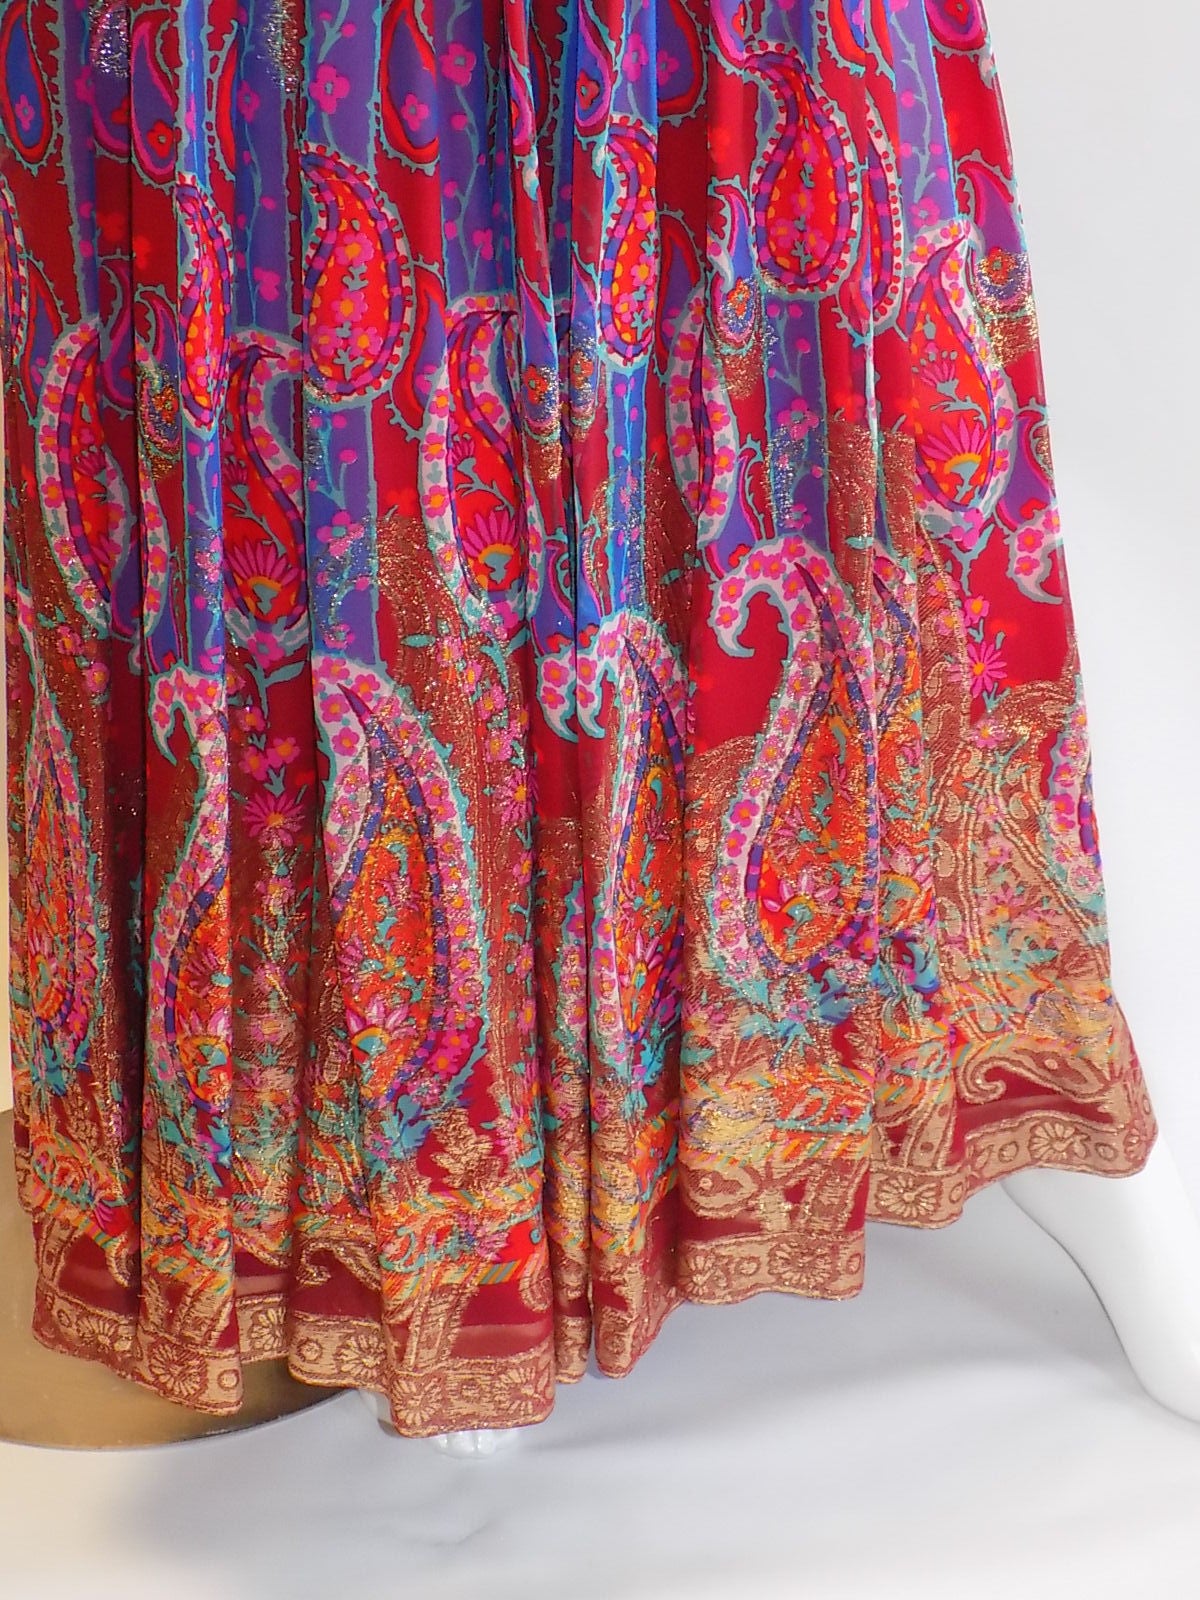 Most important collection from 1971. This  is extremely rare Lanvin Haute-Couture evening gown, in the most stunning paisley-silk chiffon  and lame . Two piece dress. Bohemian stye with blouse over. . I love the beautiful mix of textures and regal